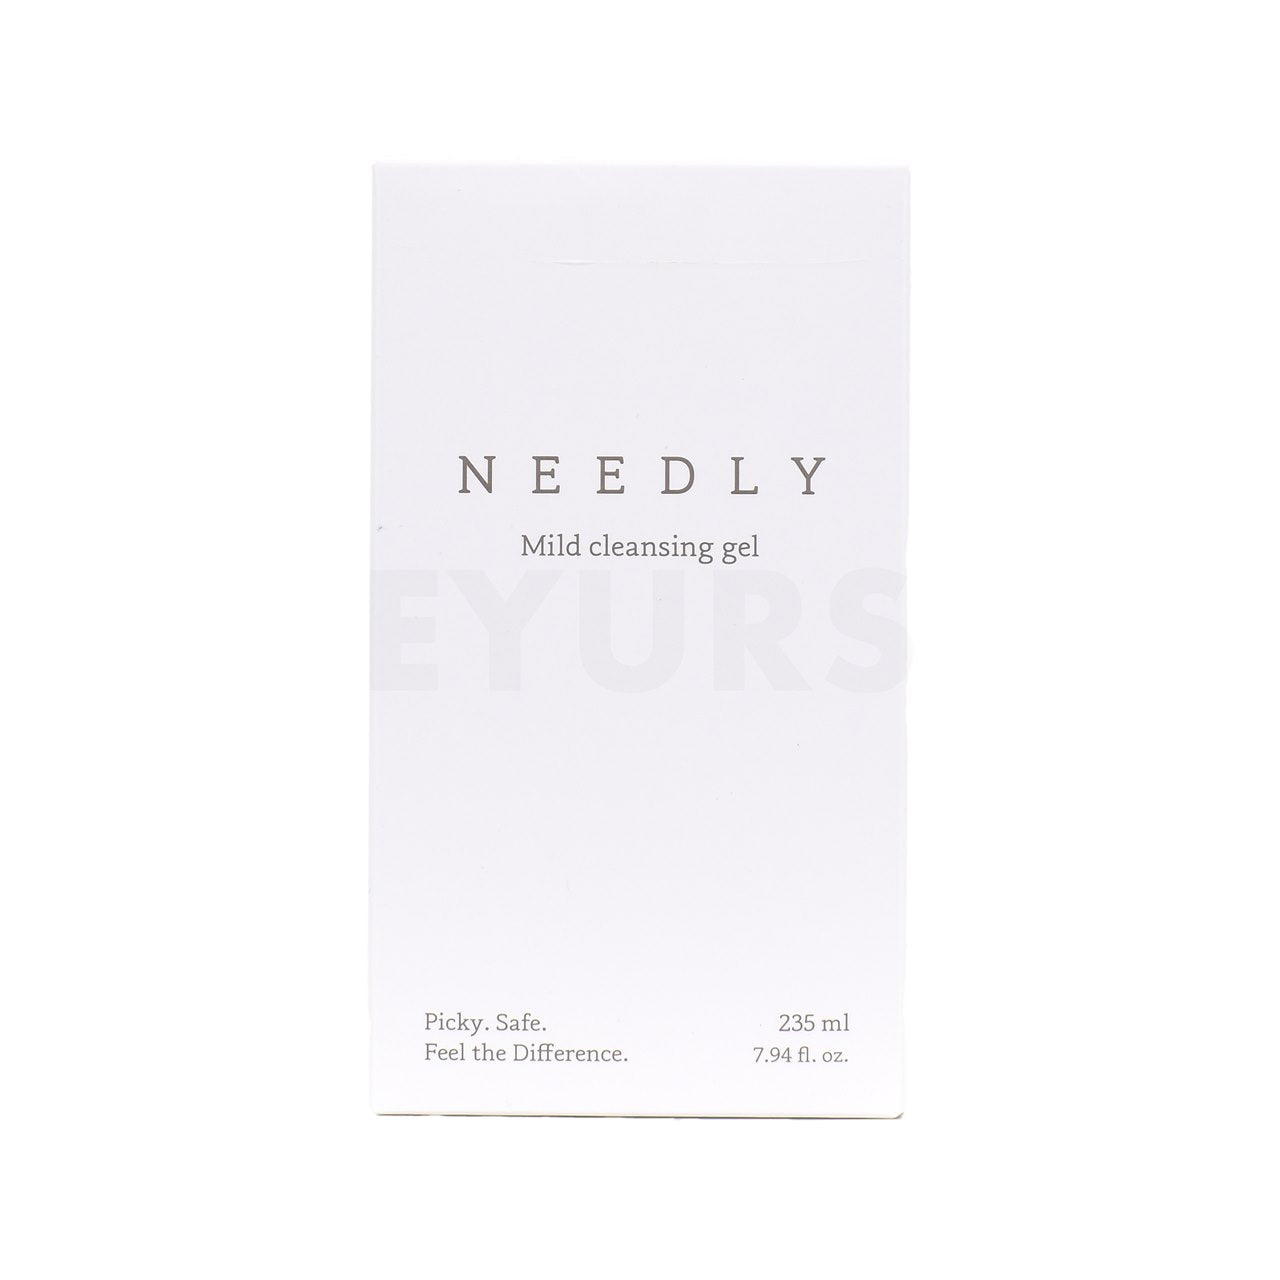 needly mild cleansing gel front side packaging box